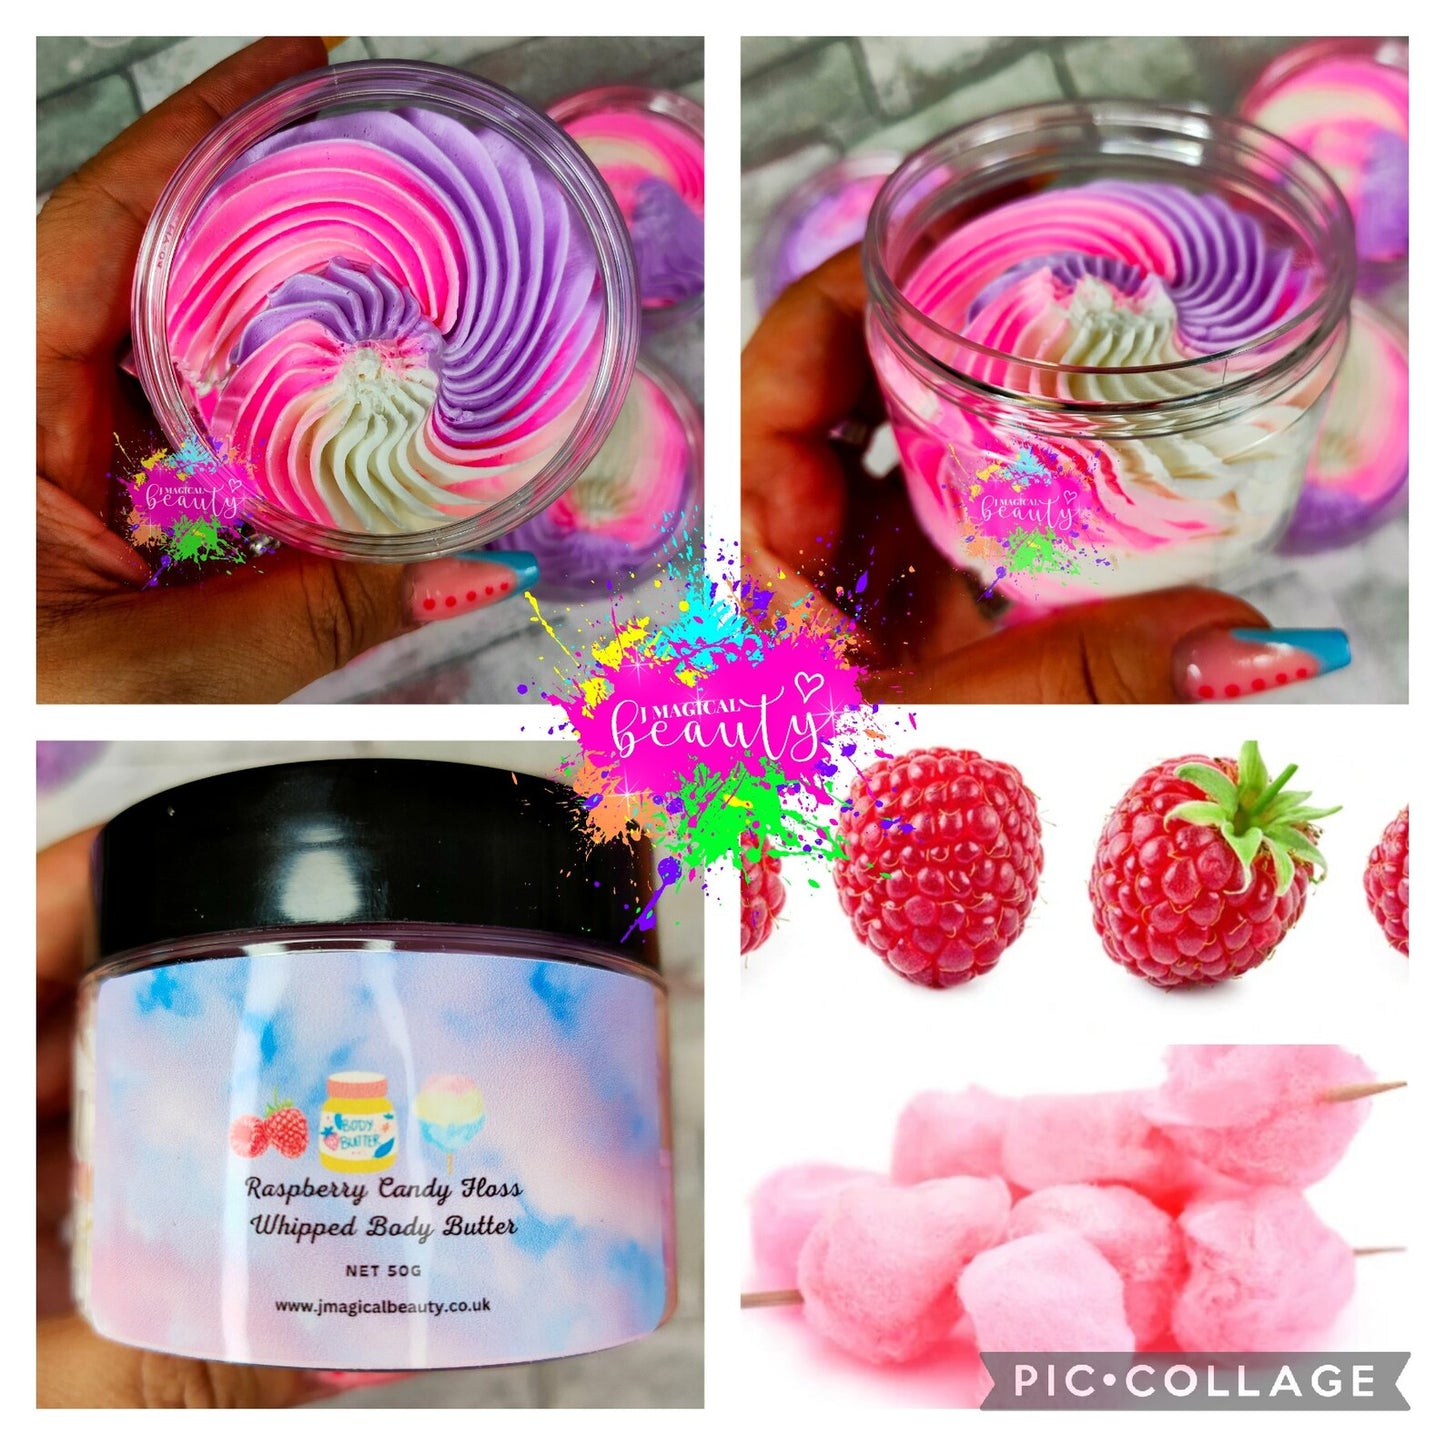 Whipped Body Butter Raspberry Candy Floss scent